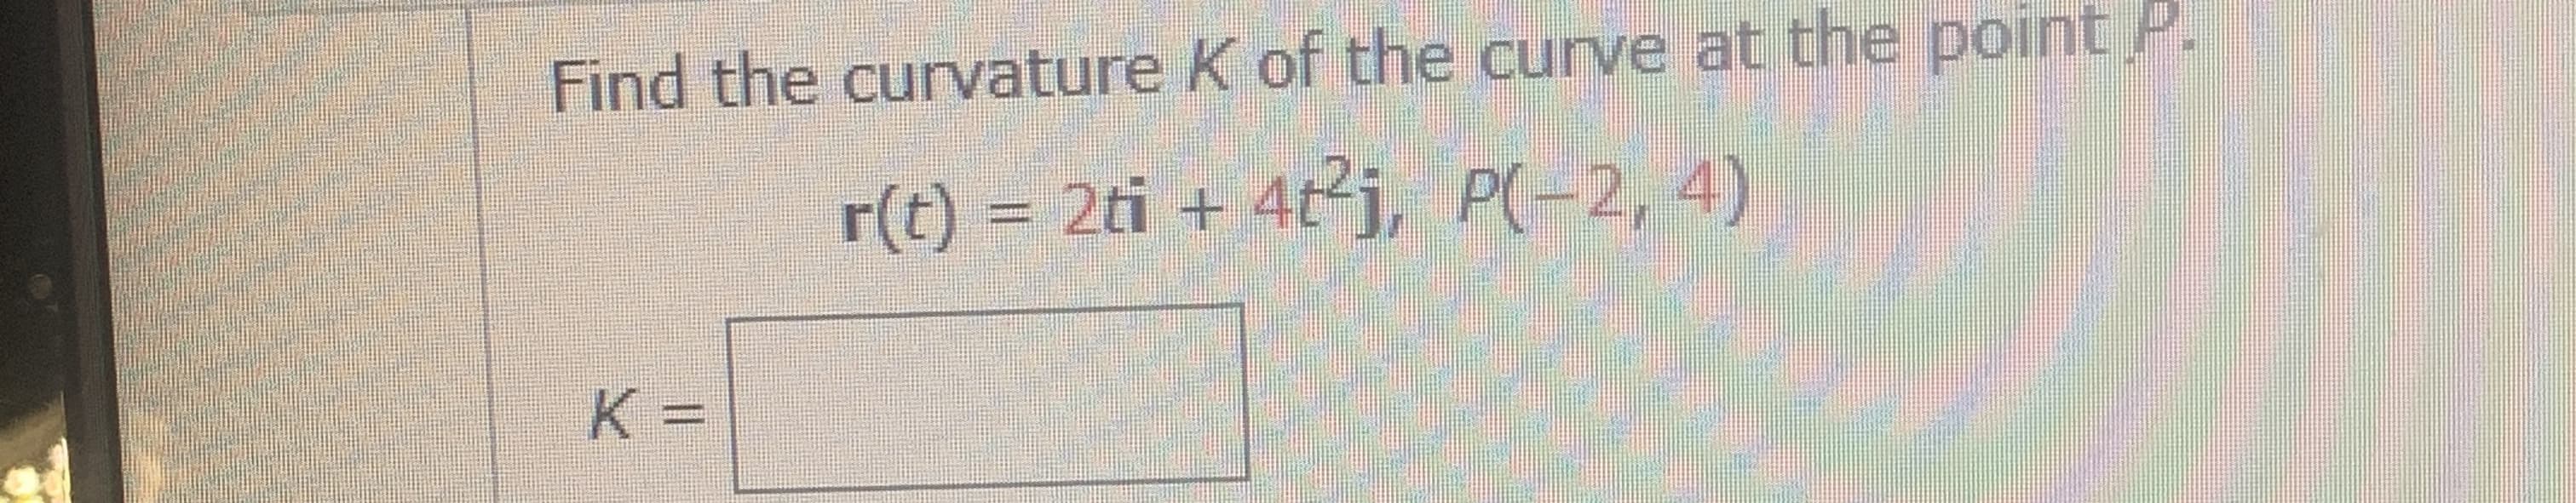 Find the curvature K of the curve at the point .
r(t) = 2ti + 4tj, P(-2, 4)
K =
